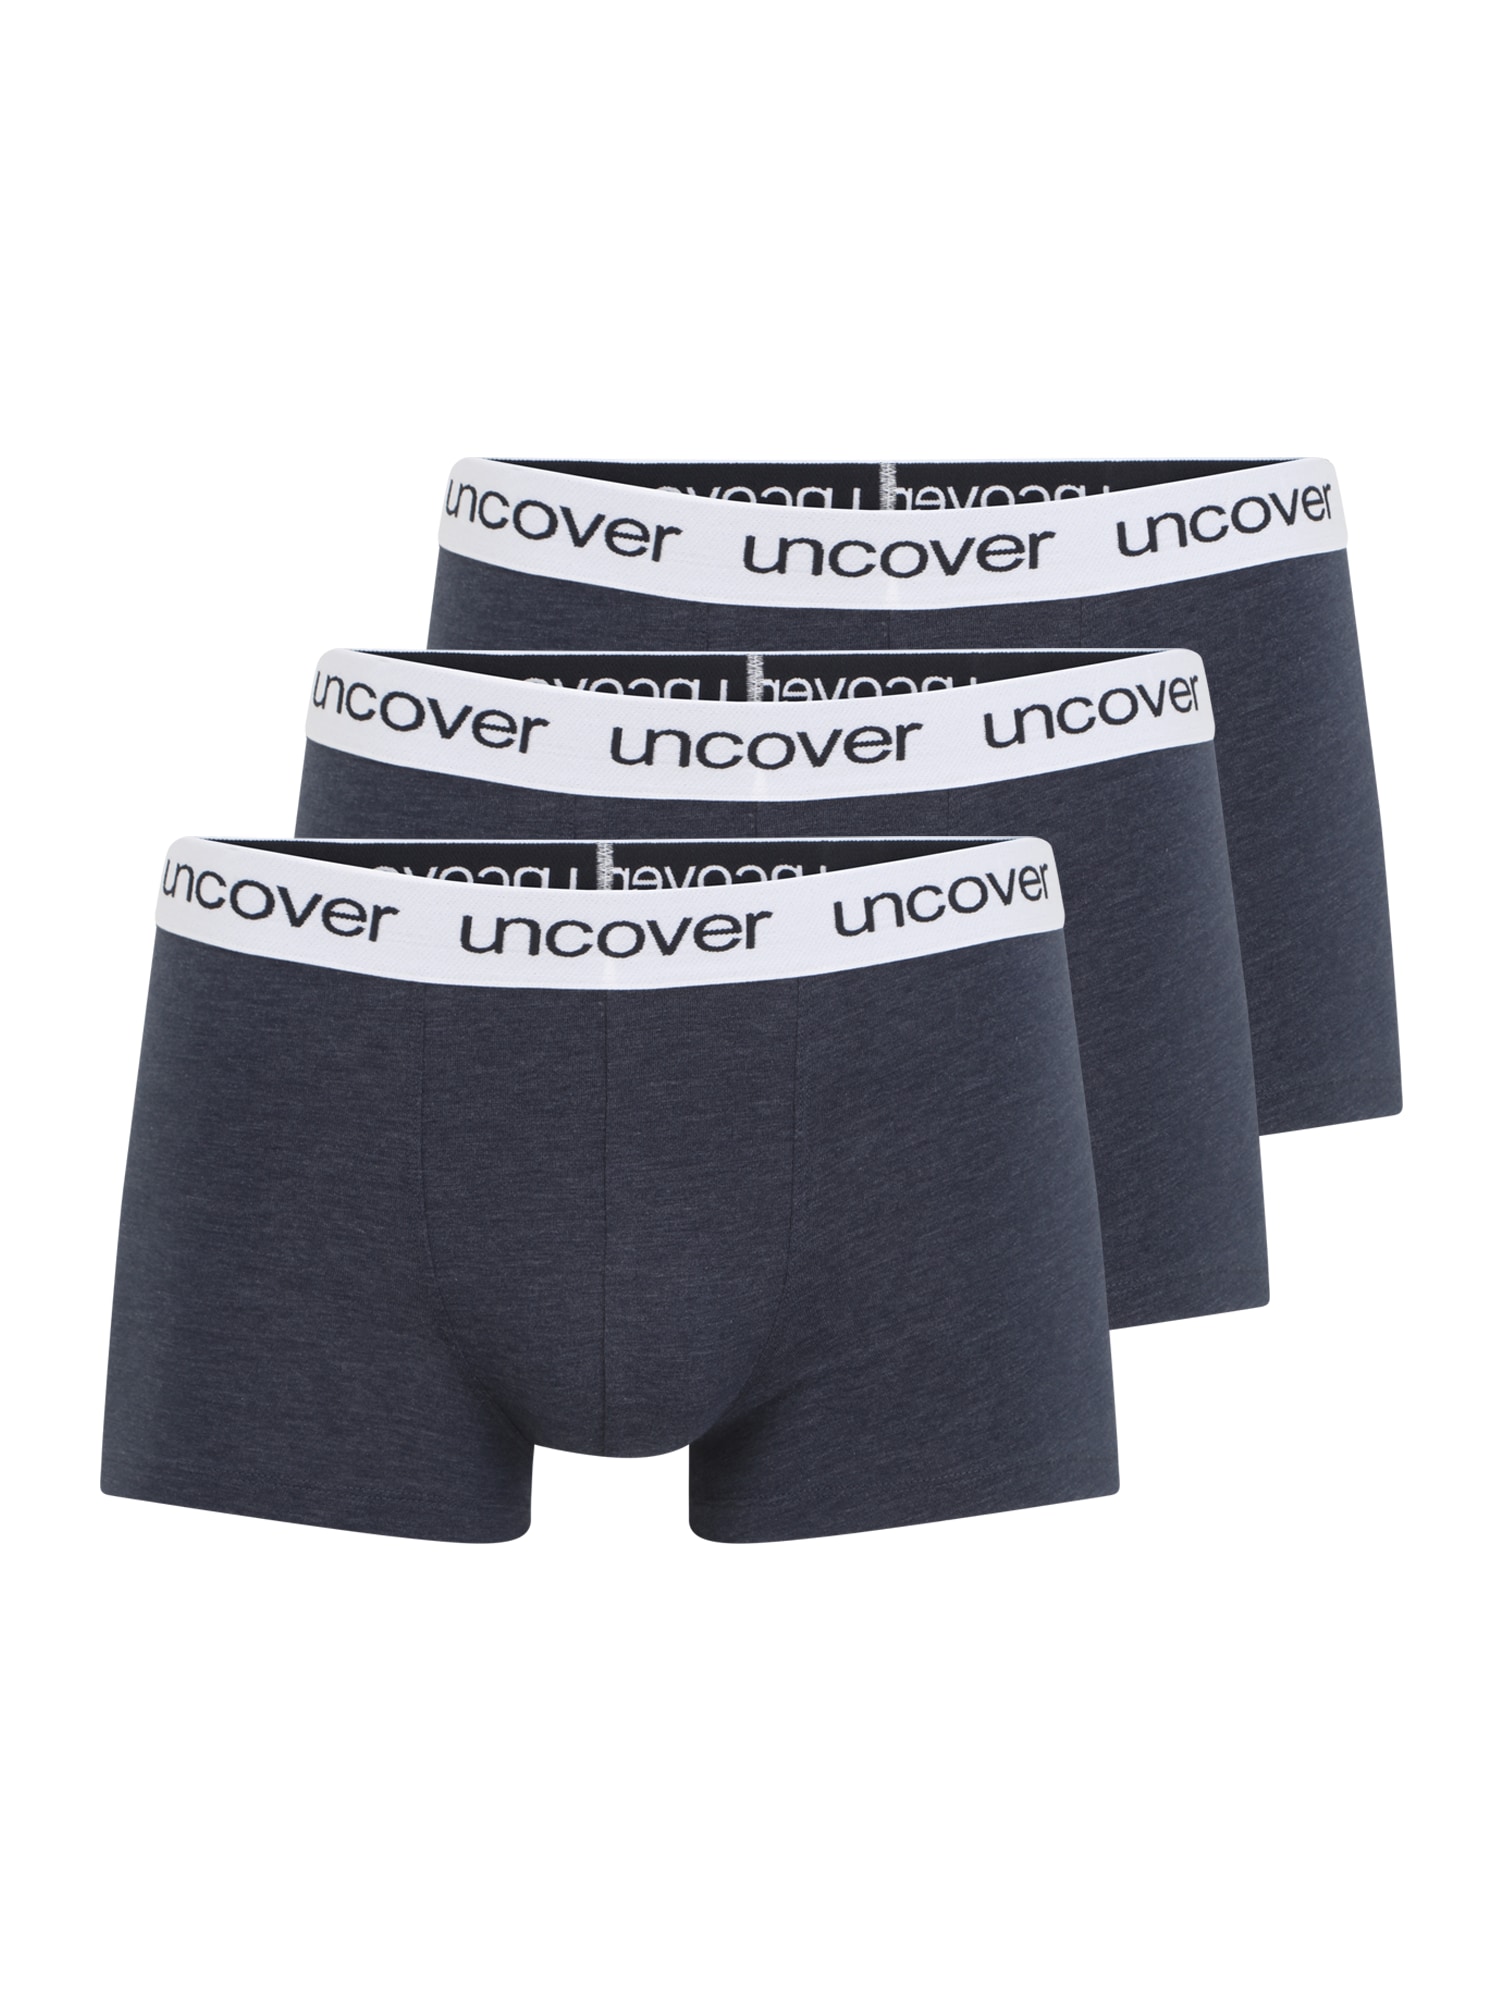 uncover by SCHIESSER Boxer trumpikės '3-Pack Uncover' tamsiai mėlyna